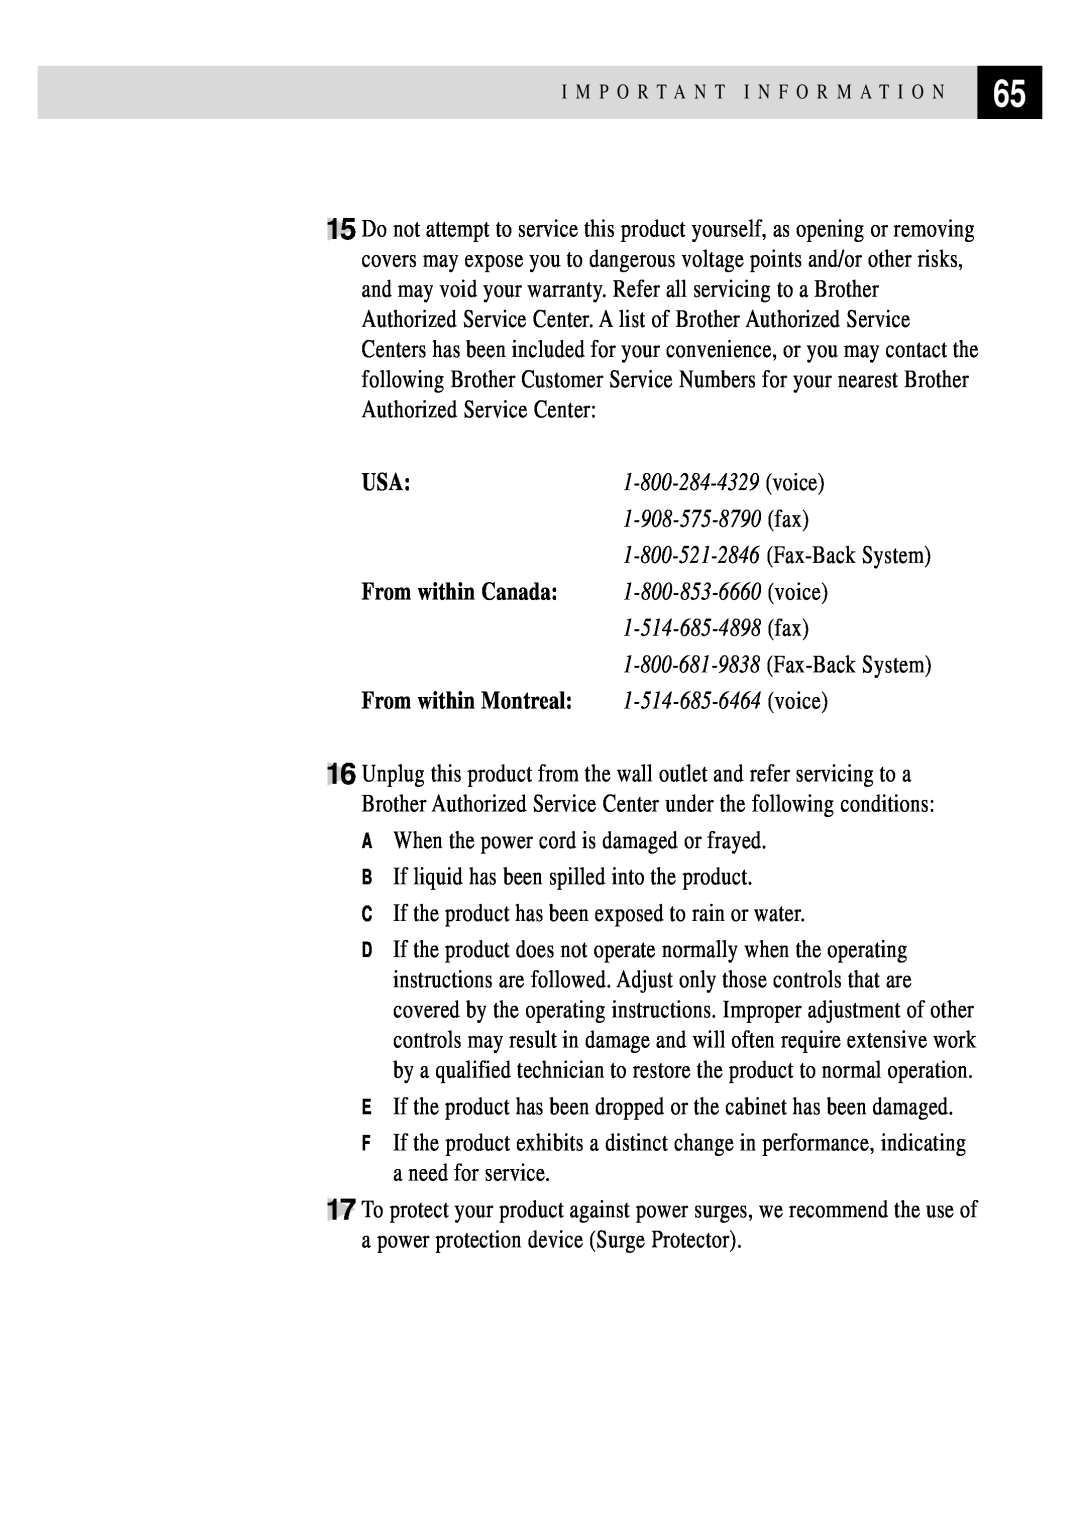 Brother FAX 255 owner manual From within Canada, voice, From within Montreal, A When the power cord is damaged or frayed 